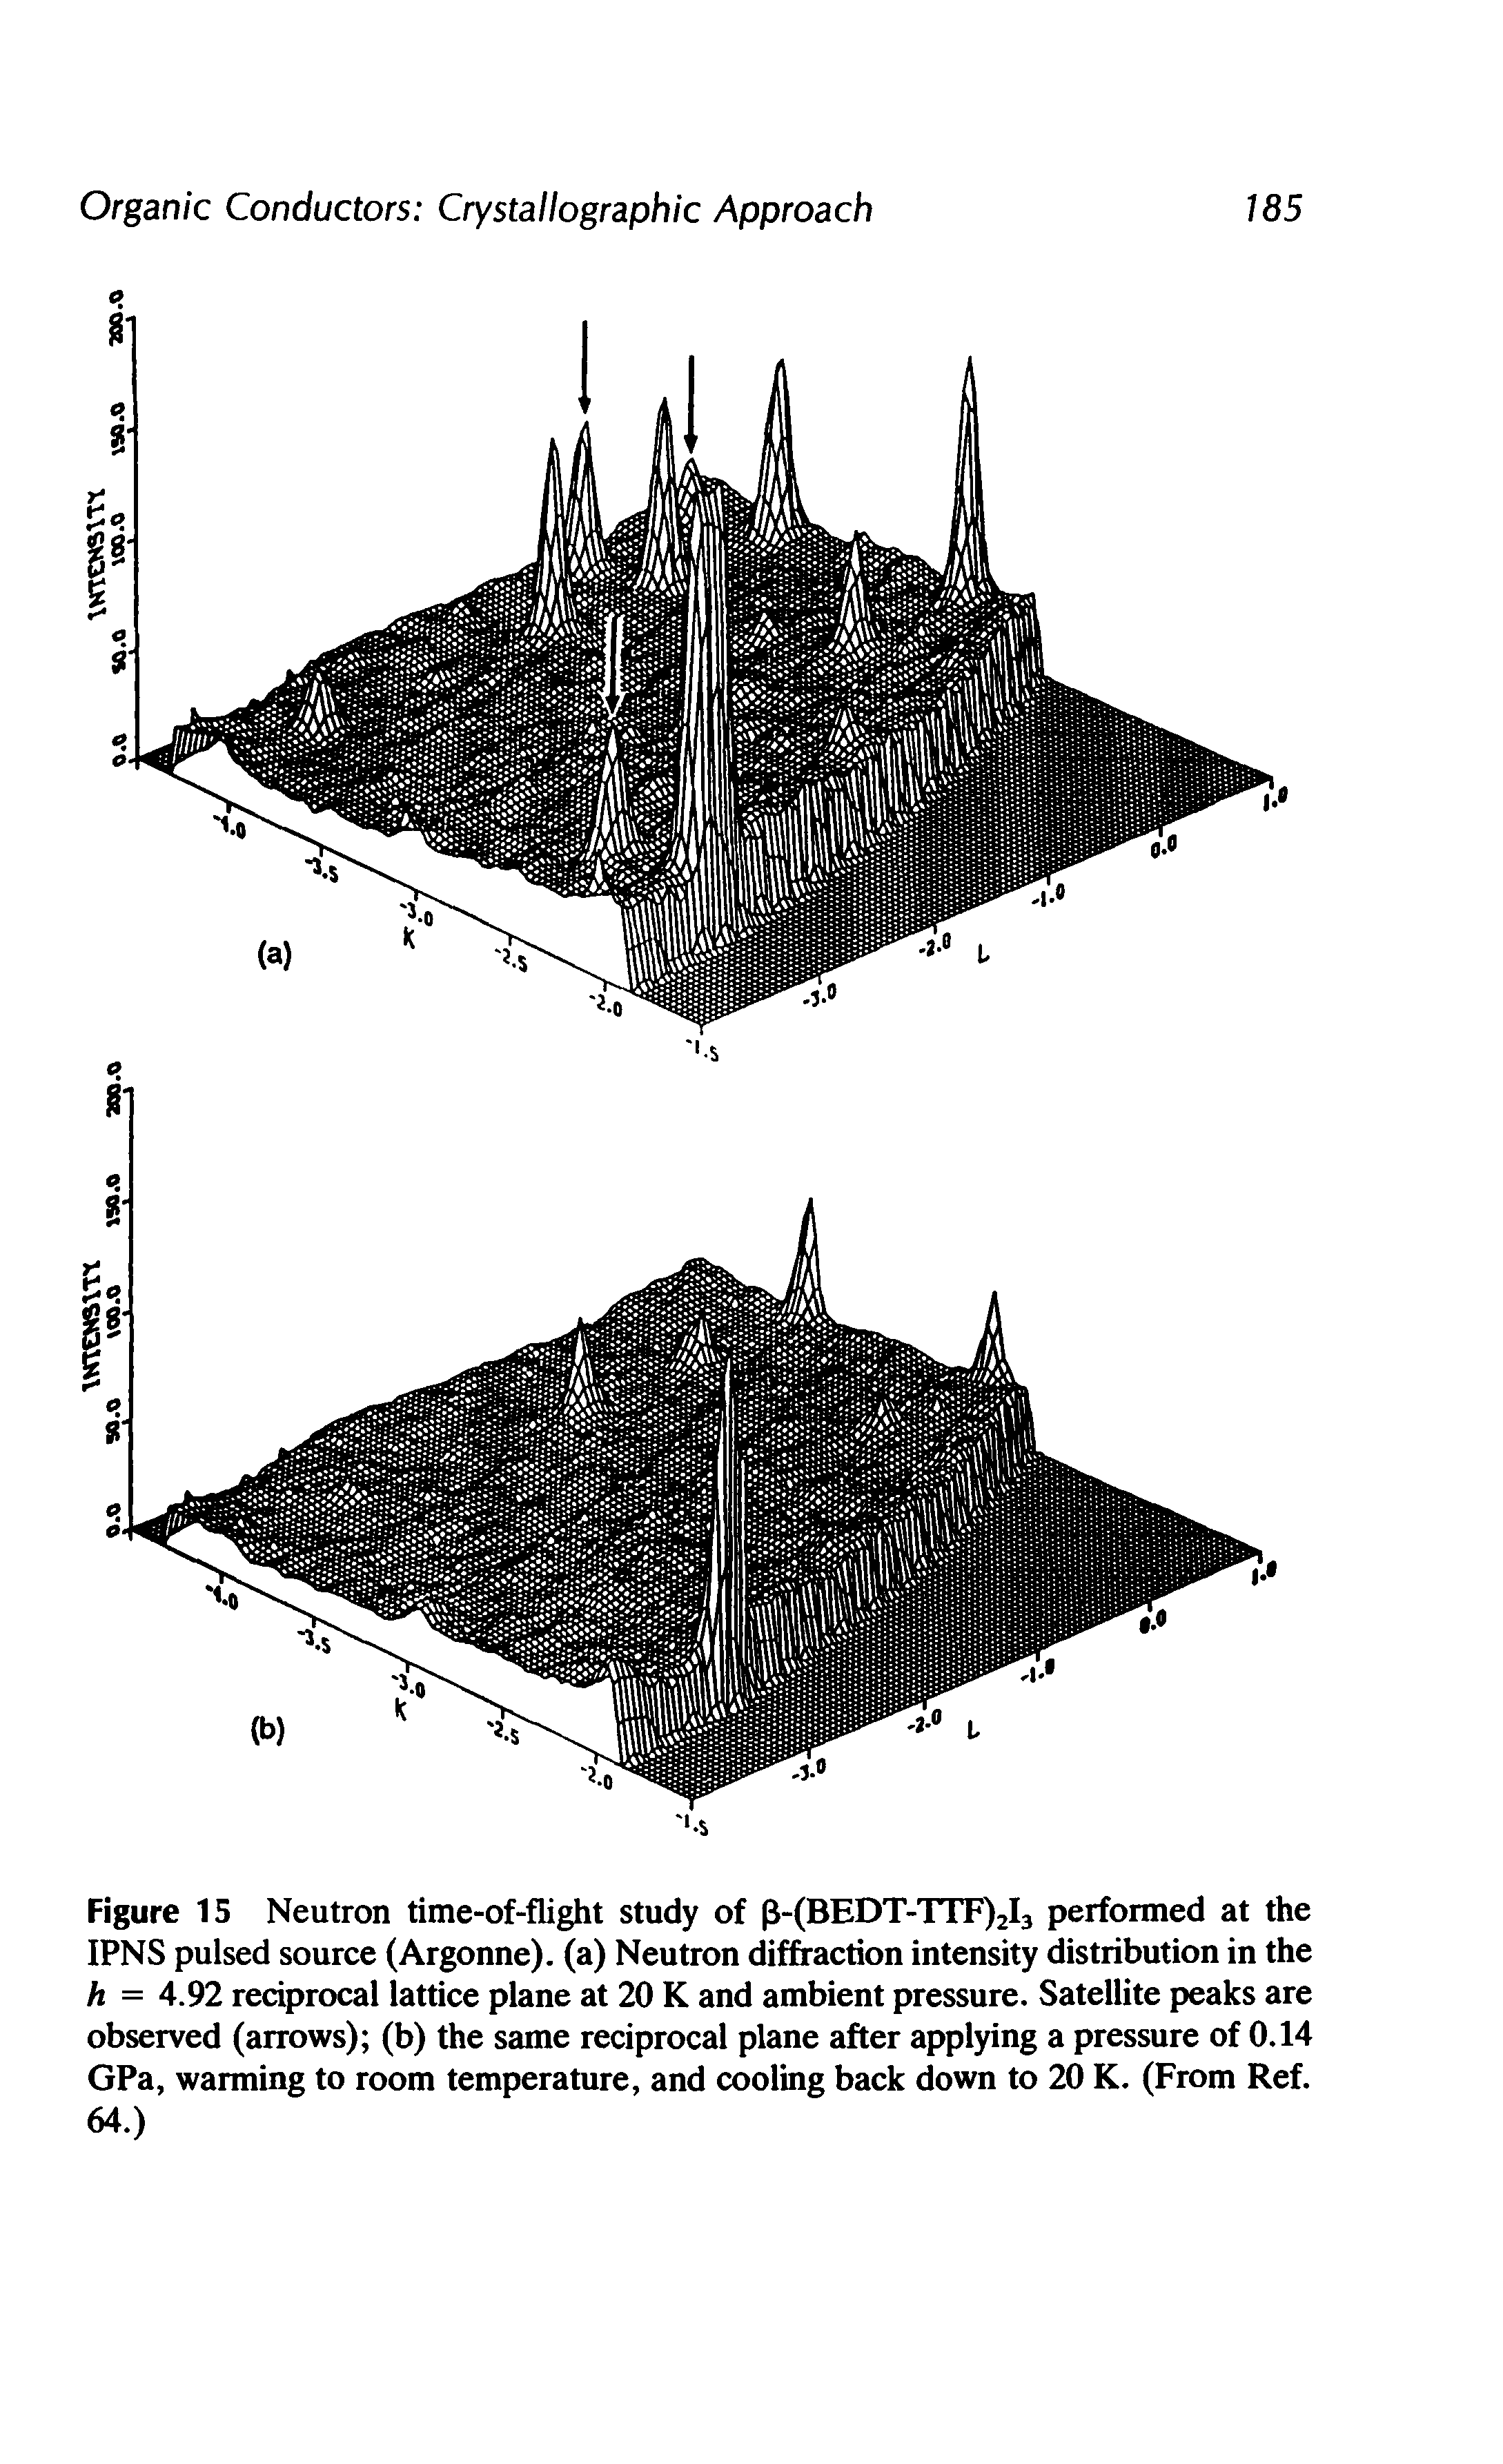 Figure 15 Neutron time-of-flight study of 0-(BEDT-TTF)2I3 performed at the IPNS pulsed source (Argonne). (a) Neutron diffraction intensity distribution in the h = 4.92 reciprocal lattice plane at 20 K and ambient pressure. Satellite peaks are observed (arrows) (b) the same reciprocal plane after applying a pressure of 0.14 GPa, warming to room temperature, and cooling back down to 20 K. (From Ref. 64.)...